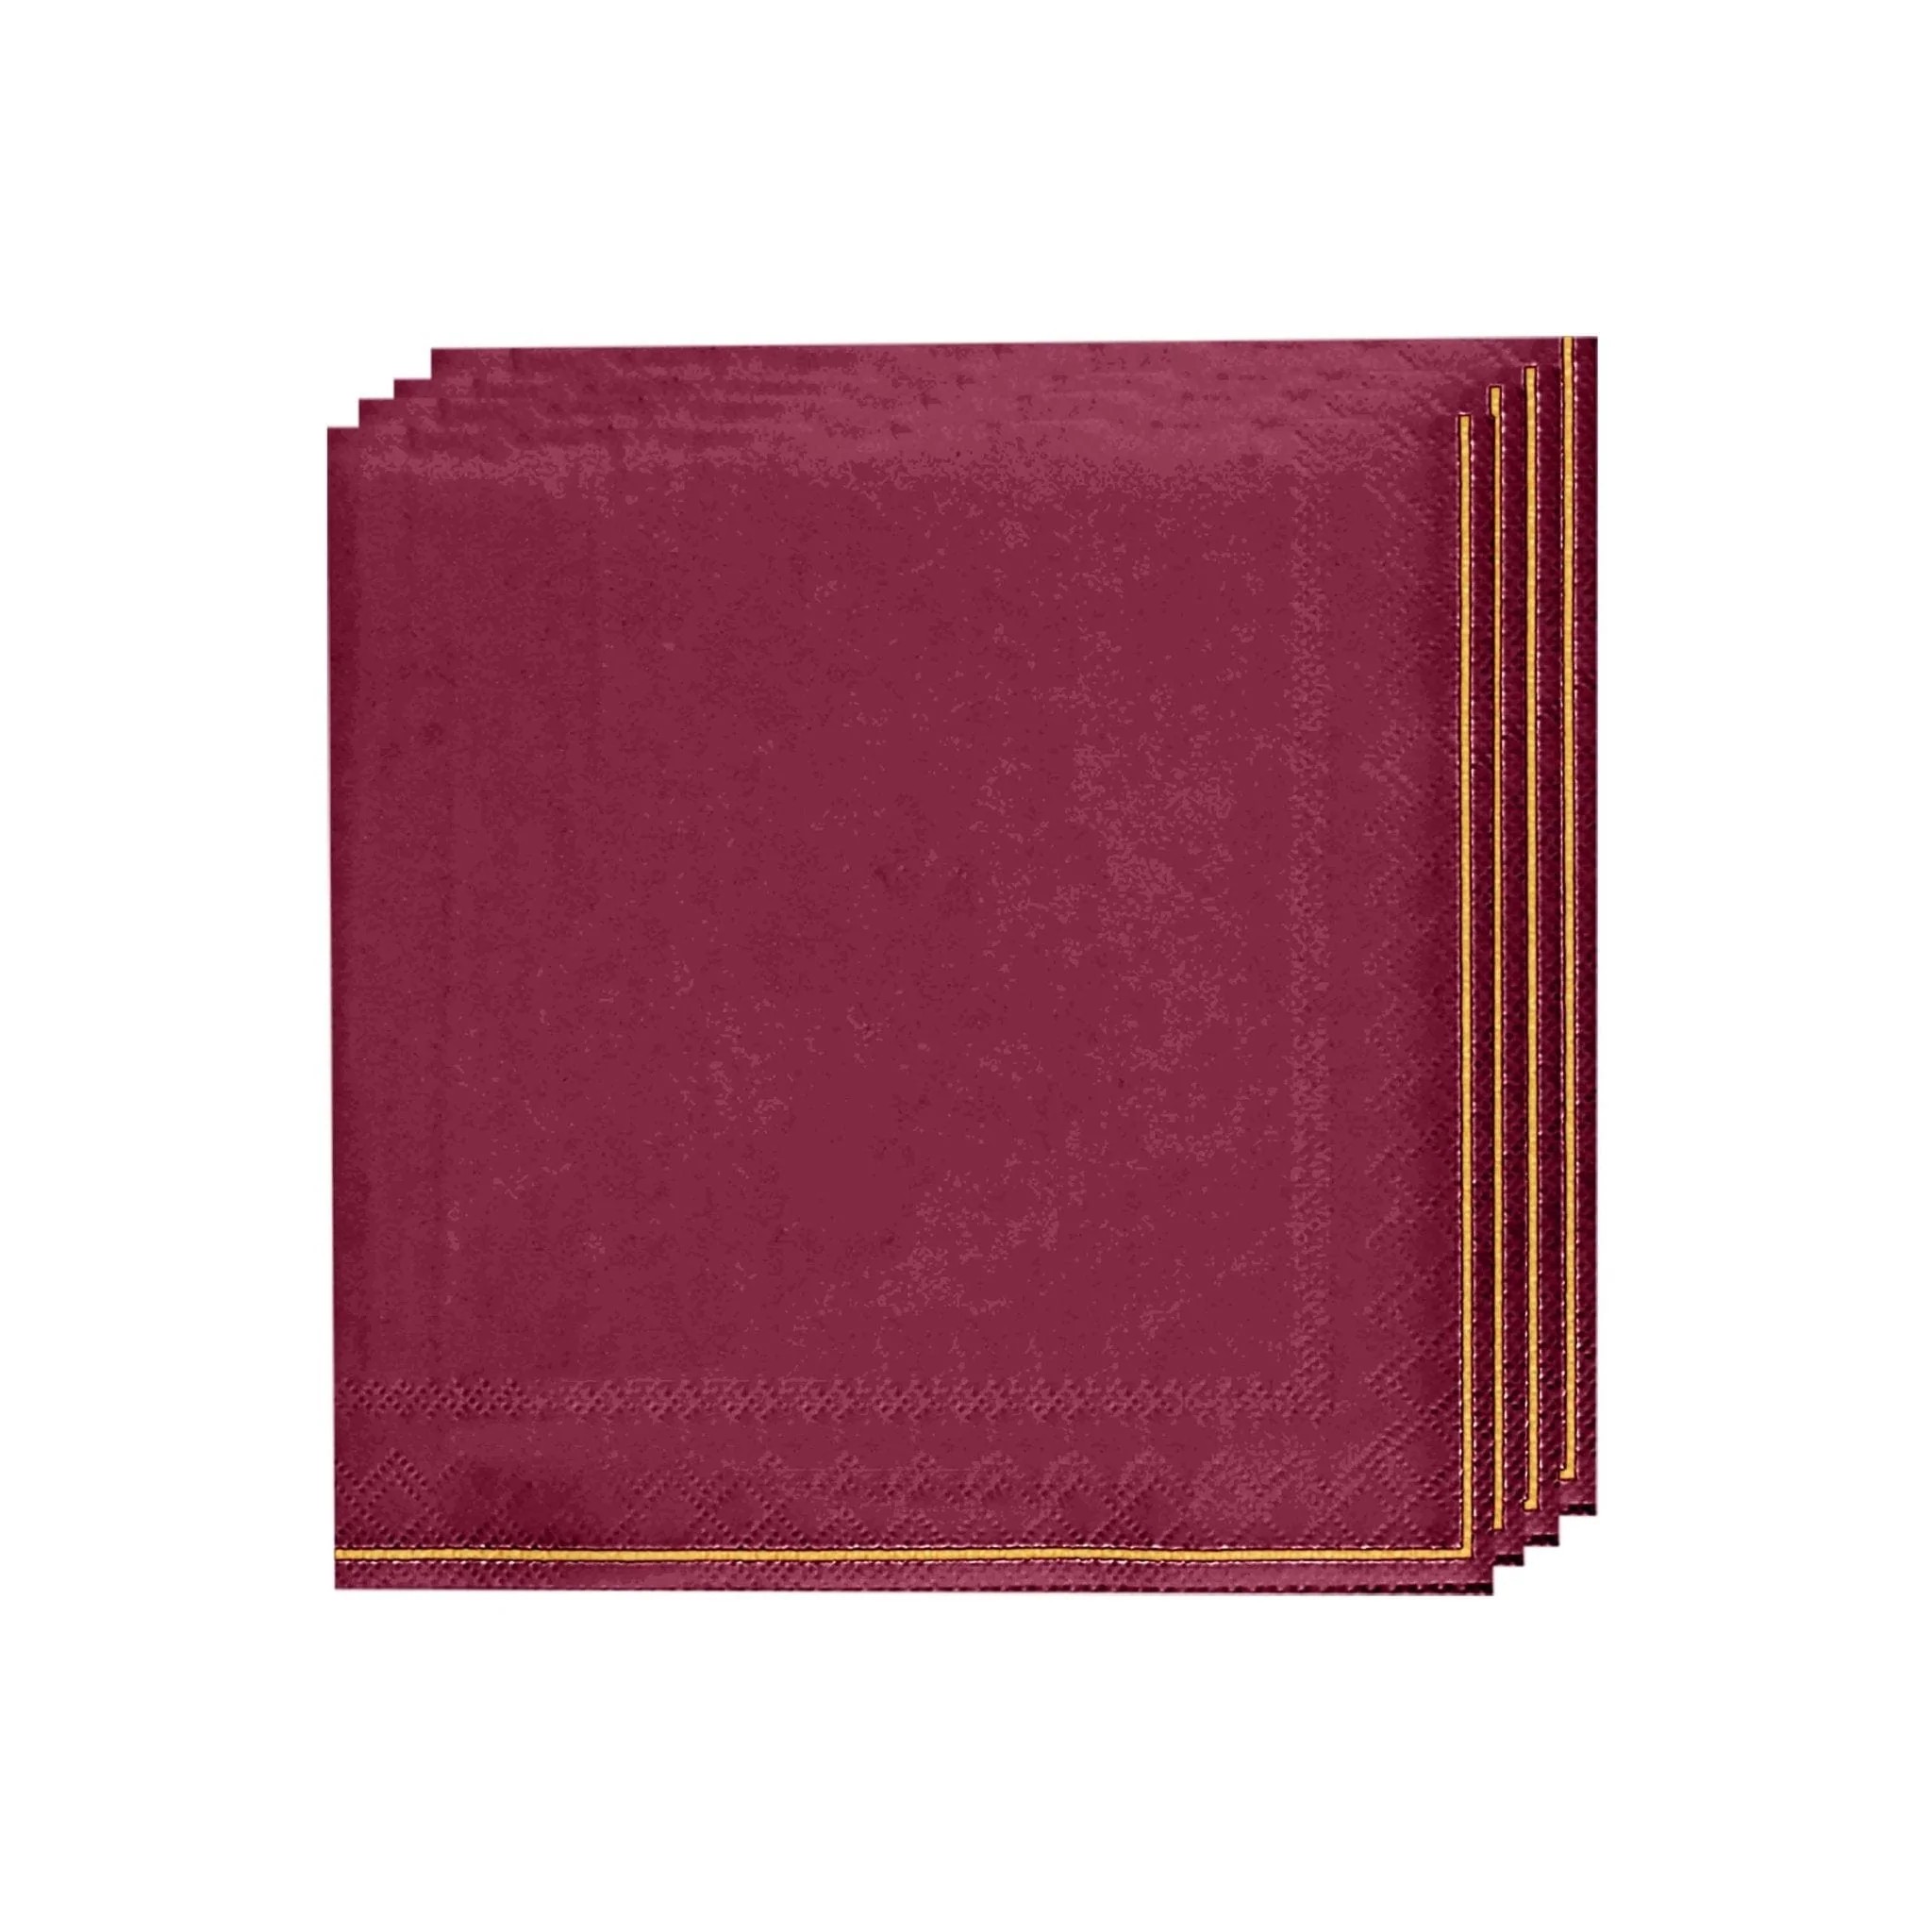 Luxe Party Cranberry with Gold Stripe Beverage Napkins - 20 pcs